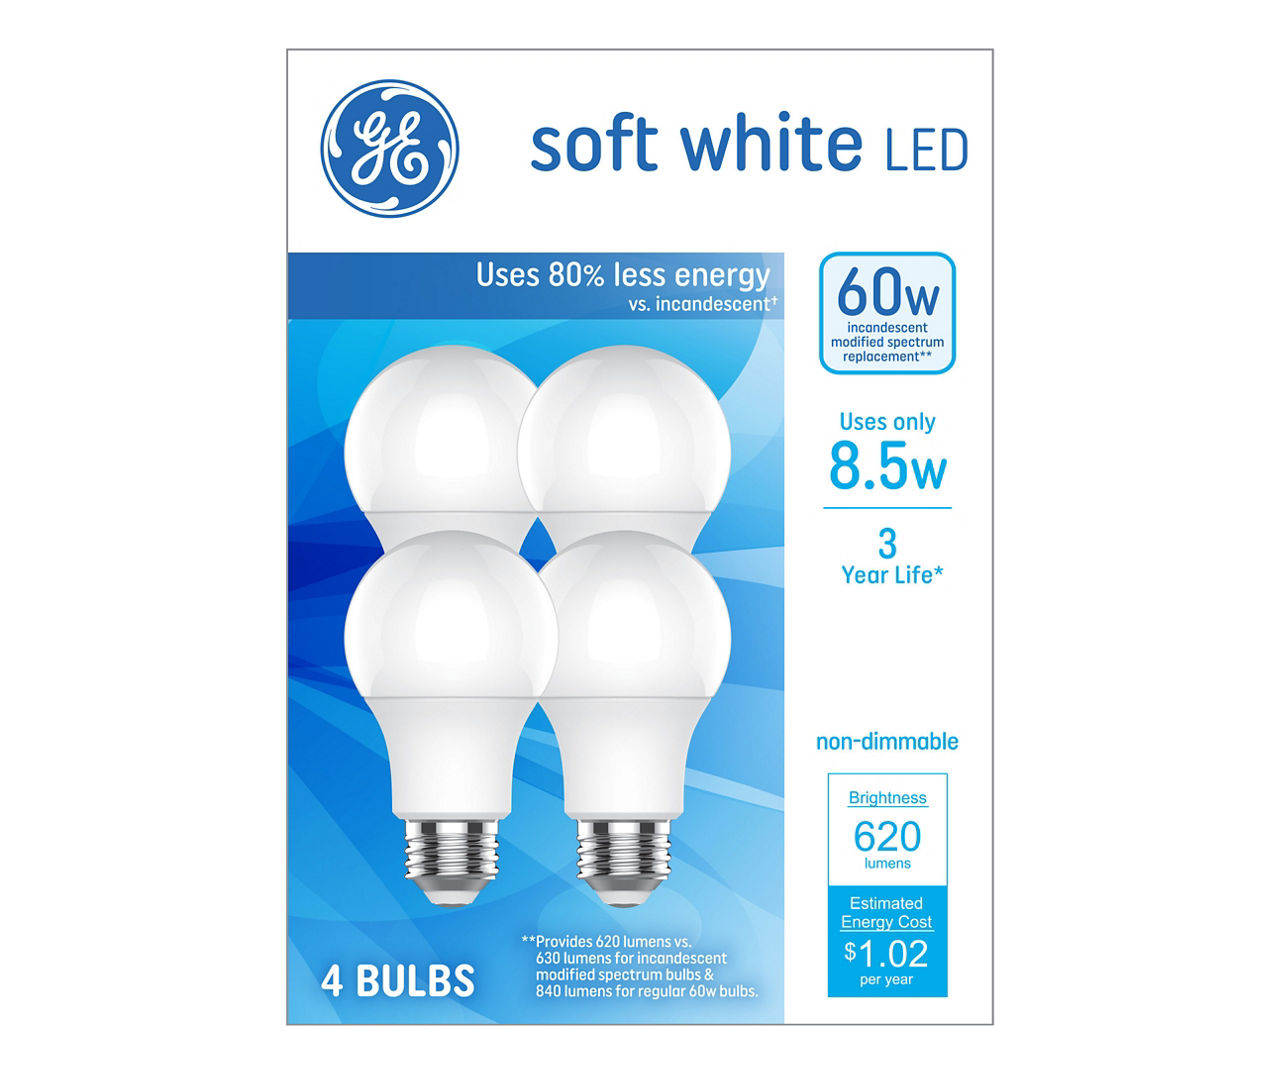 GE Specialty LED 25 Watt Replacement, Soft White, S11 Appliance Bulb (1  Pack)